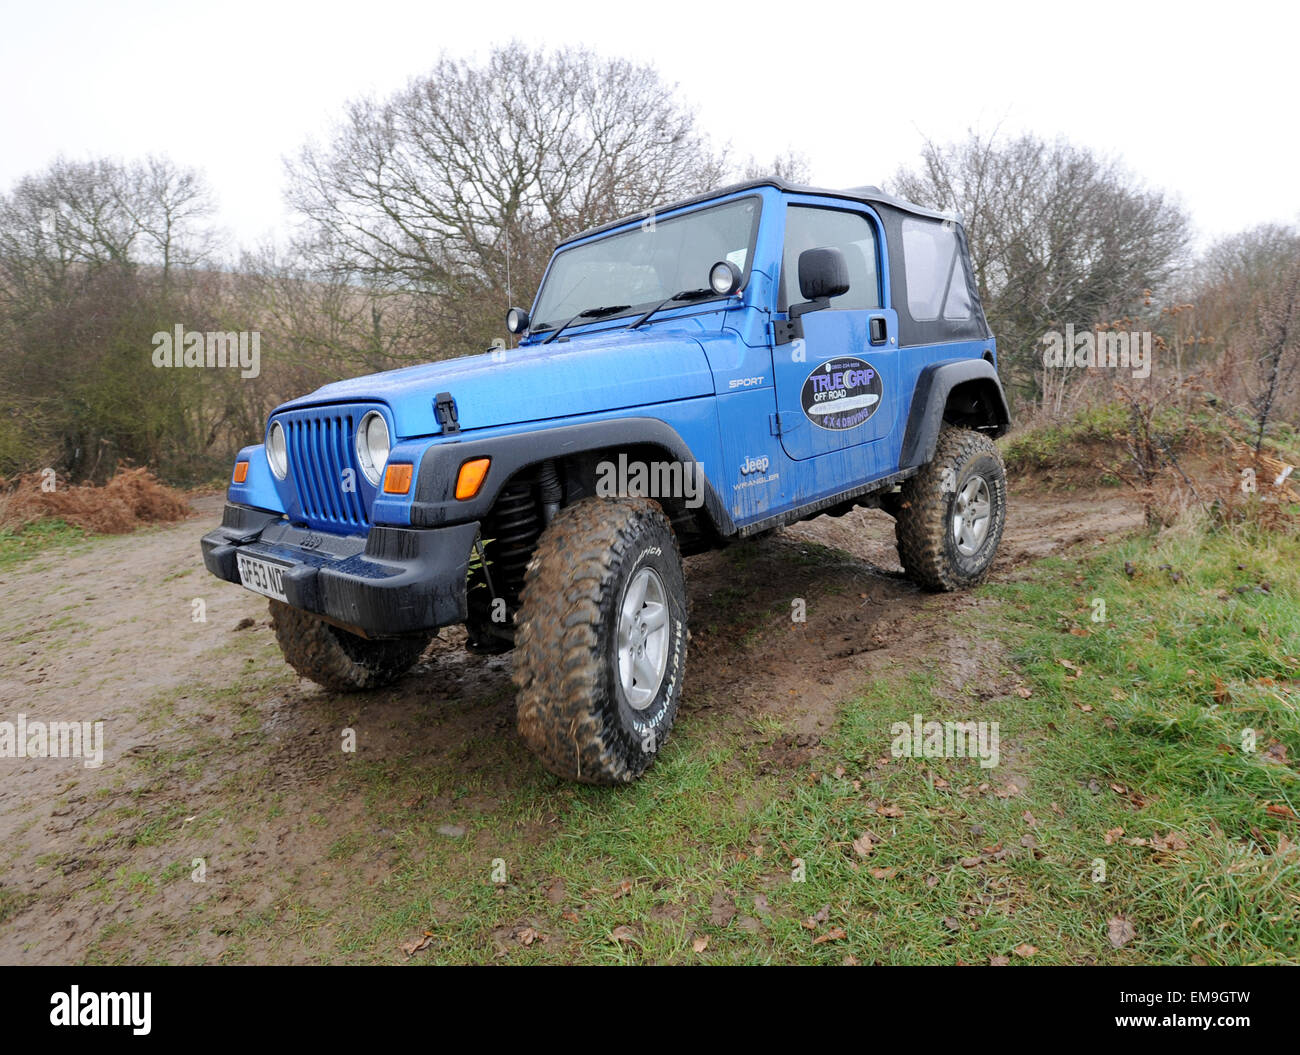 Modified Jeep Wrangler driving off road in deep wet mud and water Stock Photo